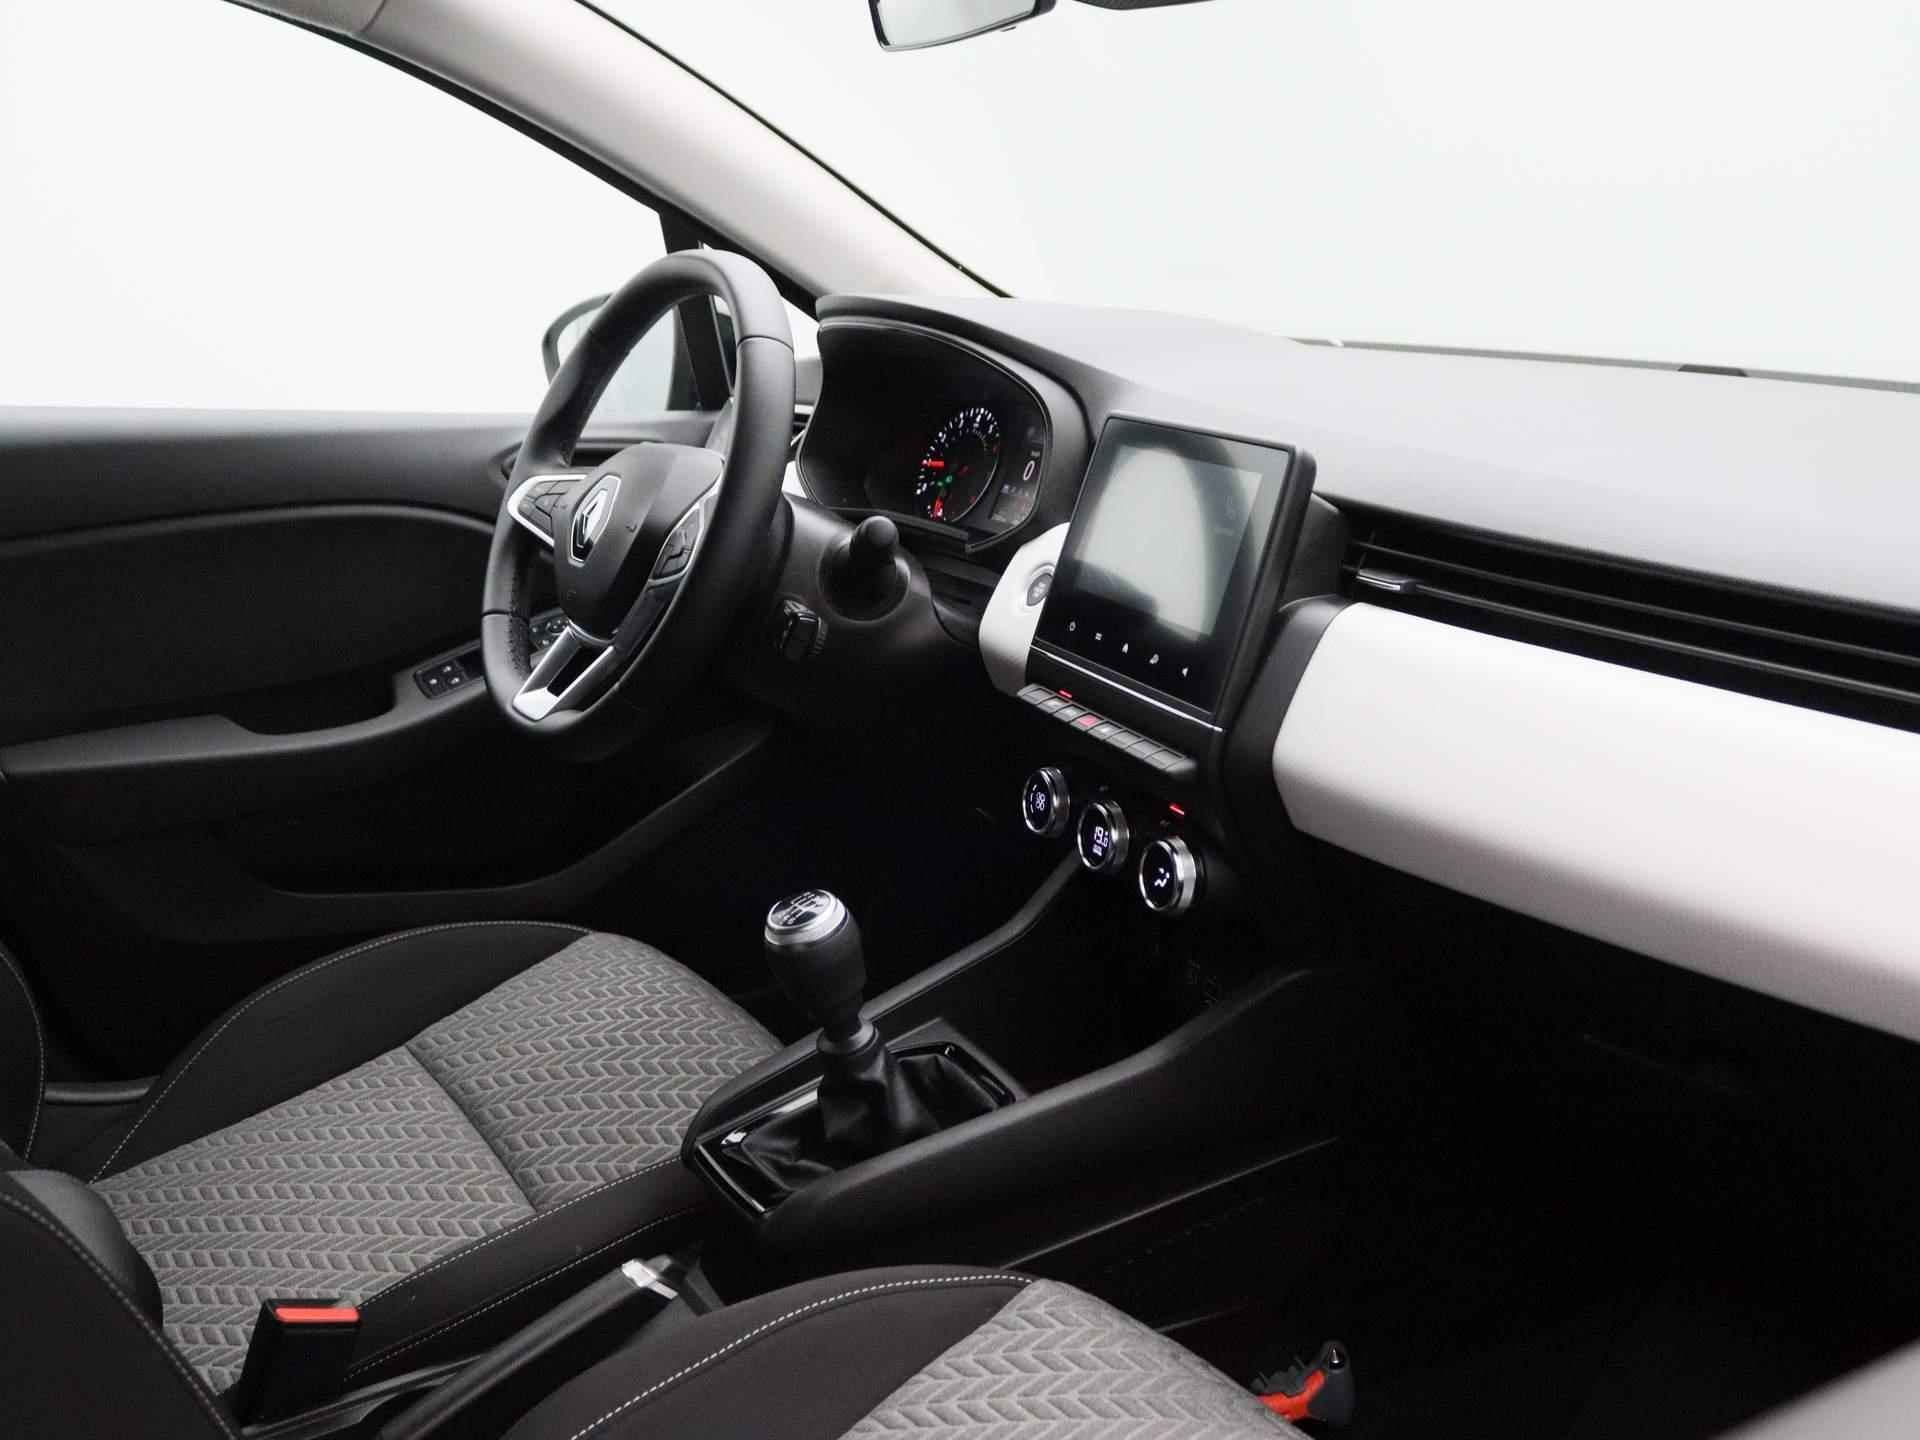 Renault Clio 1.0 TCe 90 Evolution | Climate Control | Full-Map Navigatie | Privacy Glass | PDC Achter | Keyless | 16" LMV | Apple Carplay & Android Auto - 31/35